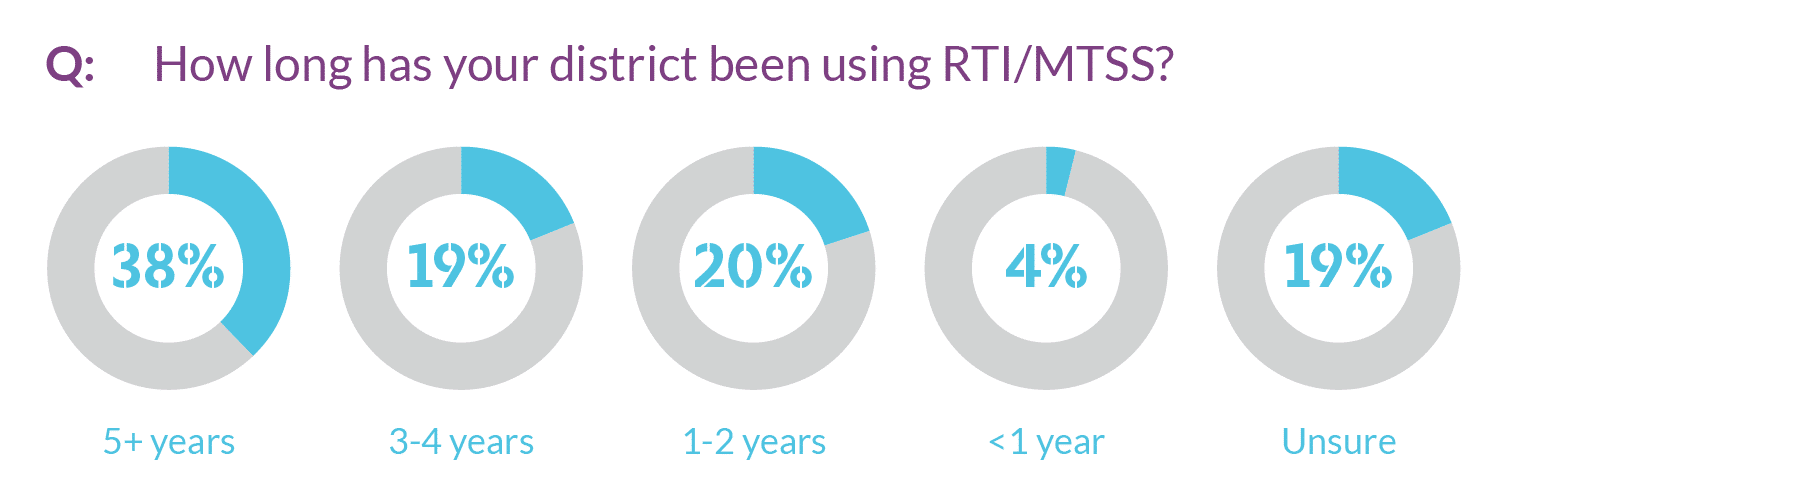 Graph showing breakdown of how long districts have been using an RTI/MTSS model